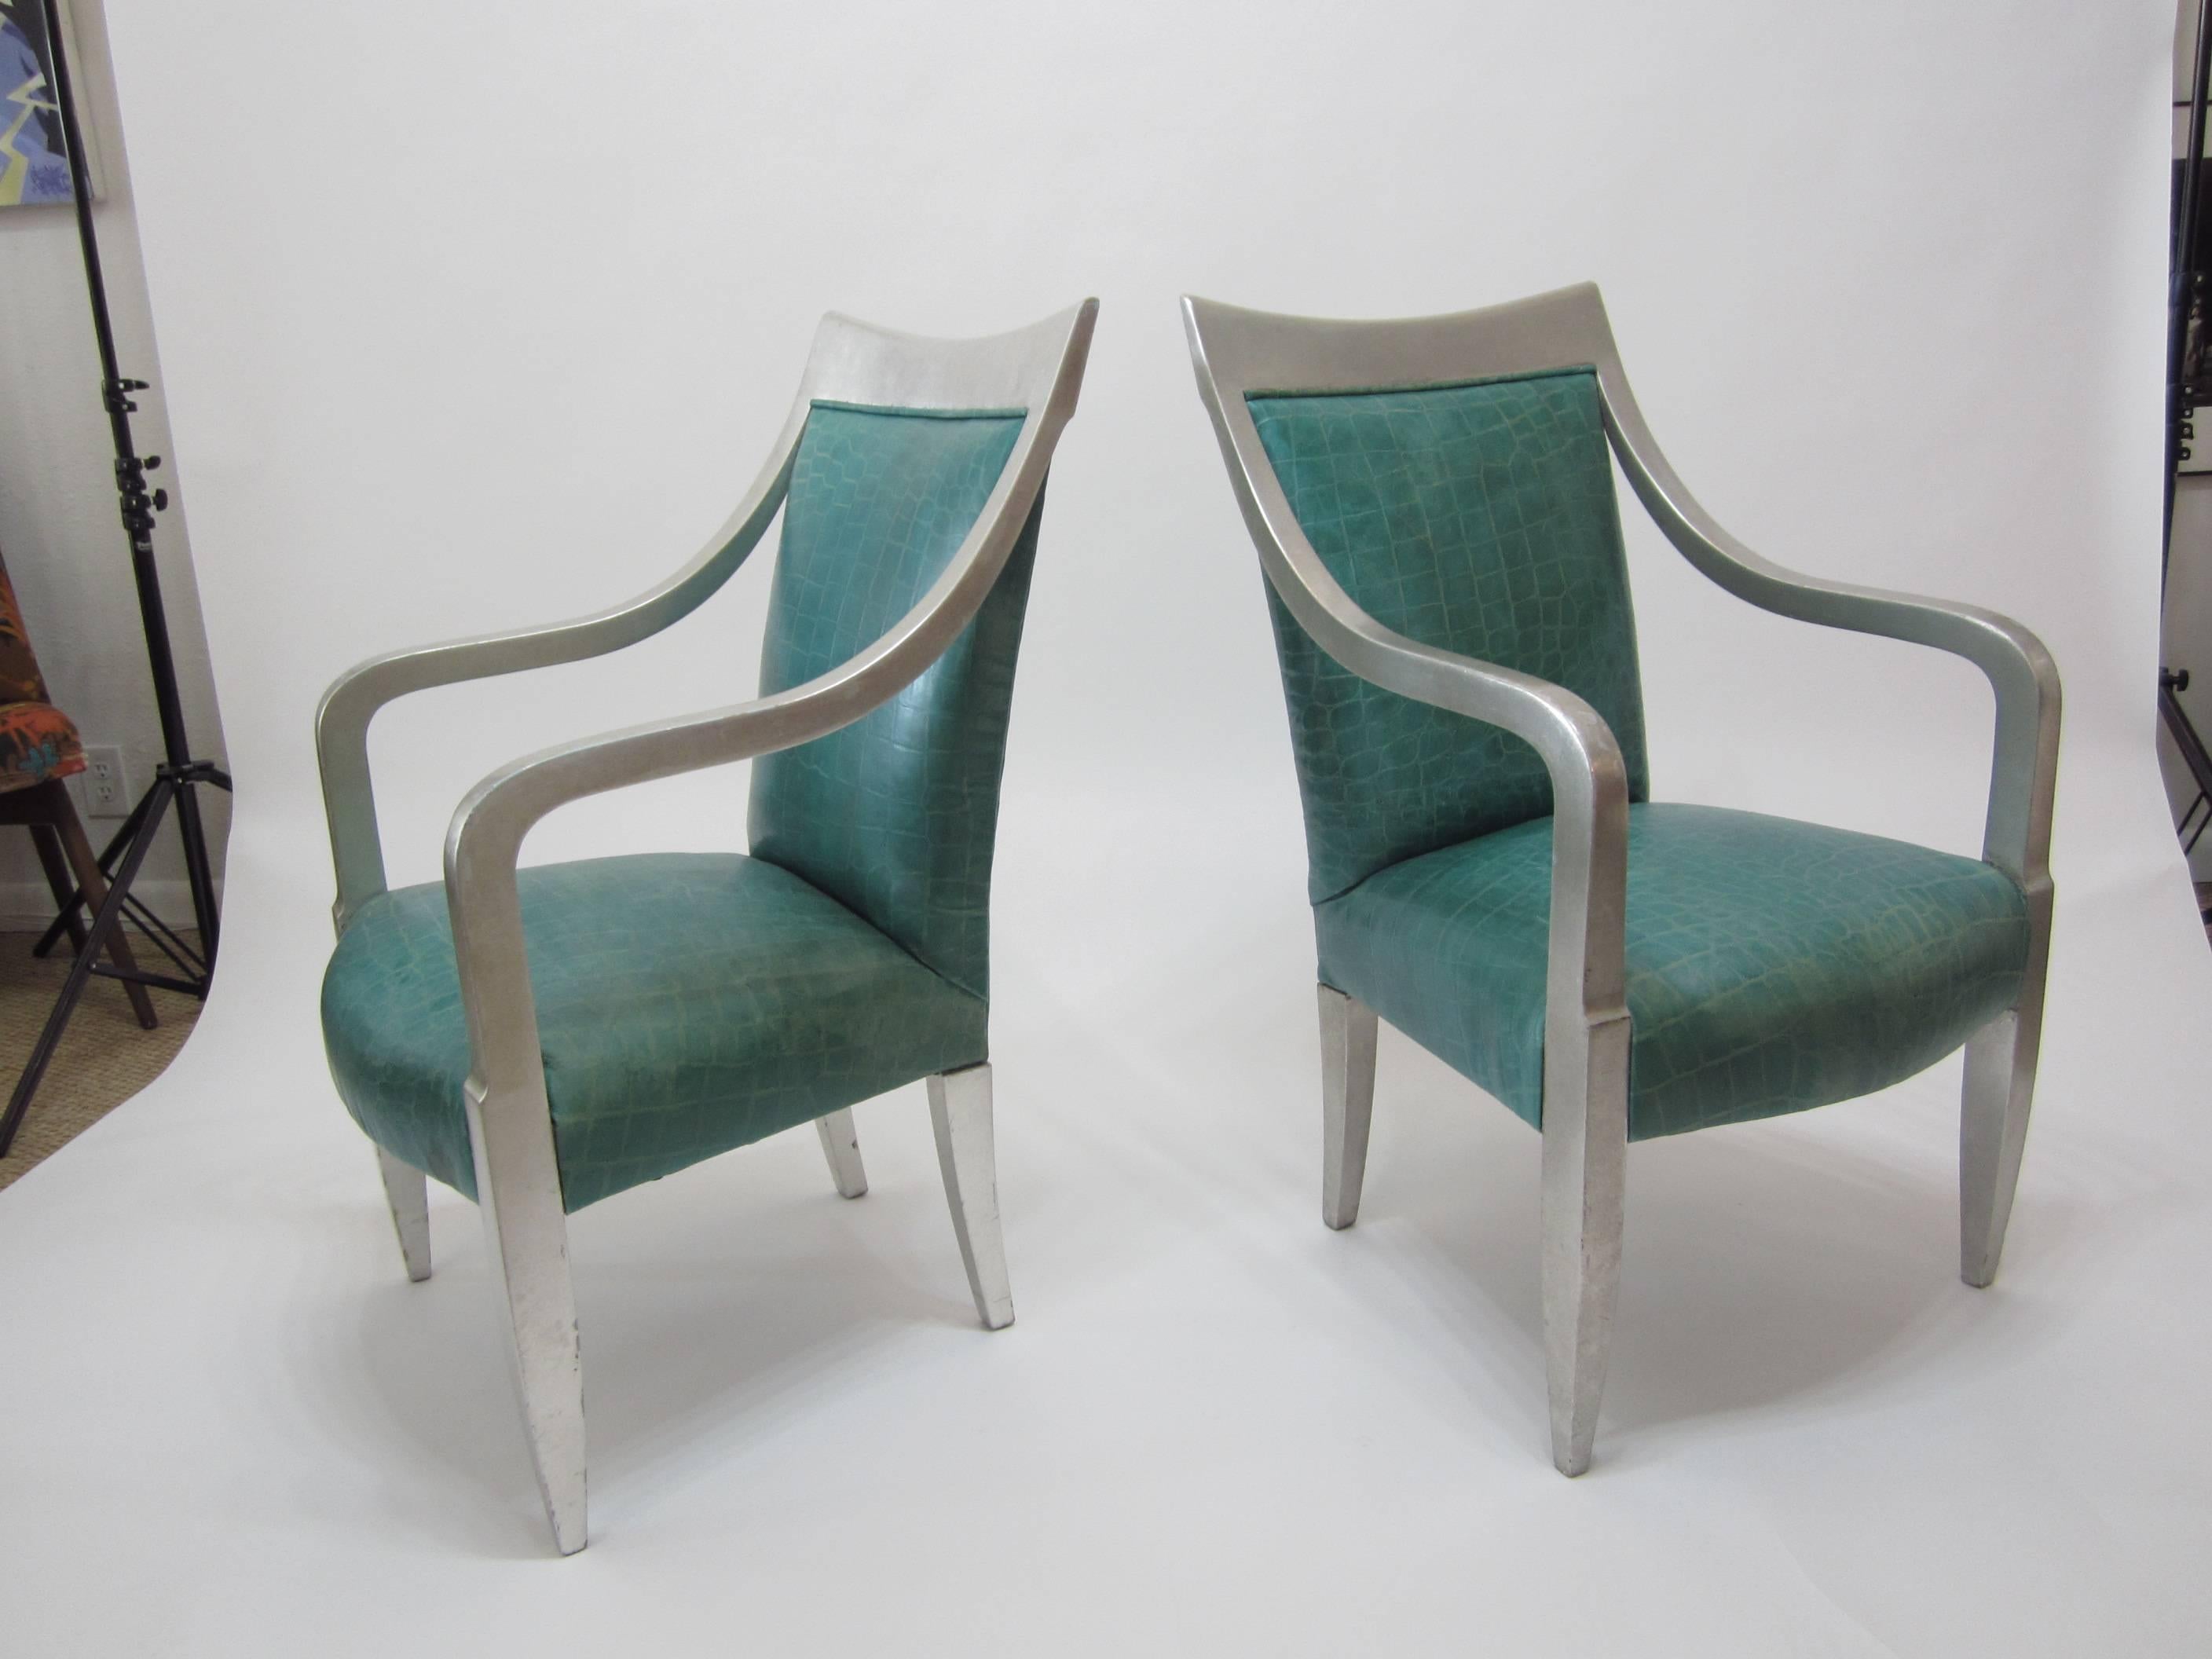 Italian Pair of Silver Leaf Croc-Embossed Leather Armchairs by Donghia 